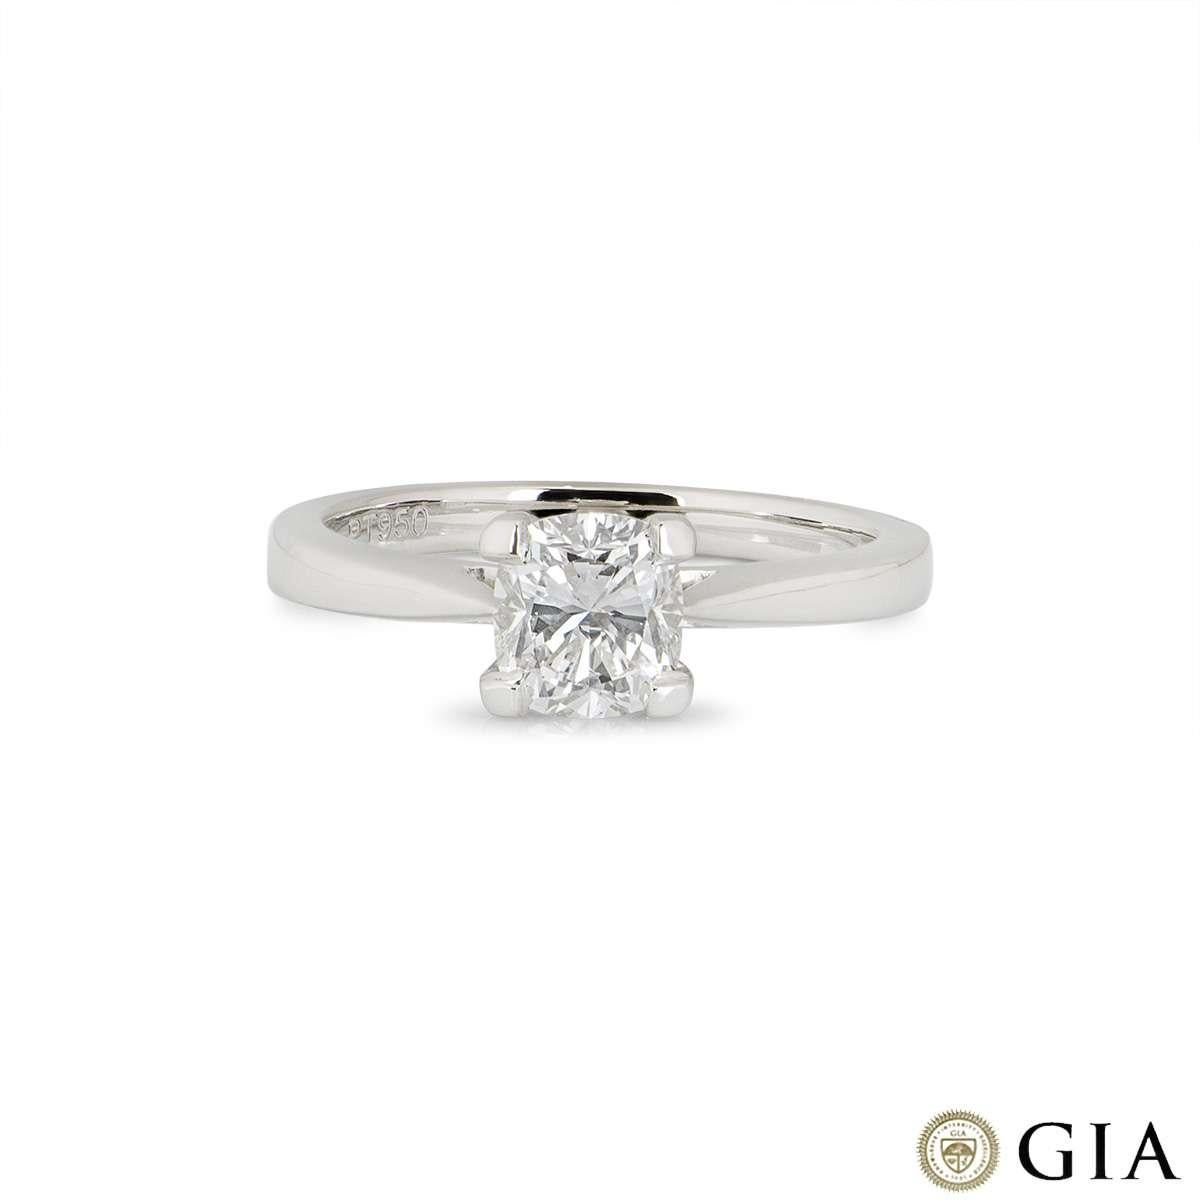 GIA Certified Platinum Cushion Cut Diamond Ring 1.01 Carat E/VS2 In New Condition For Sale In London, GB